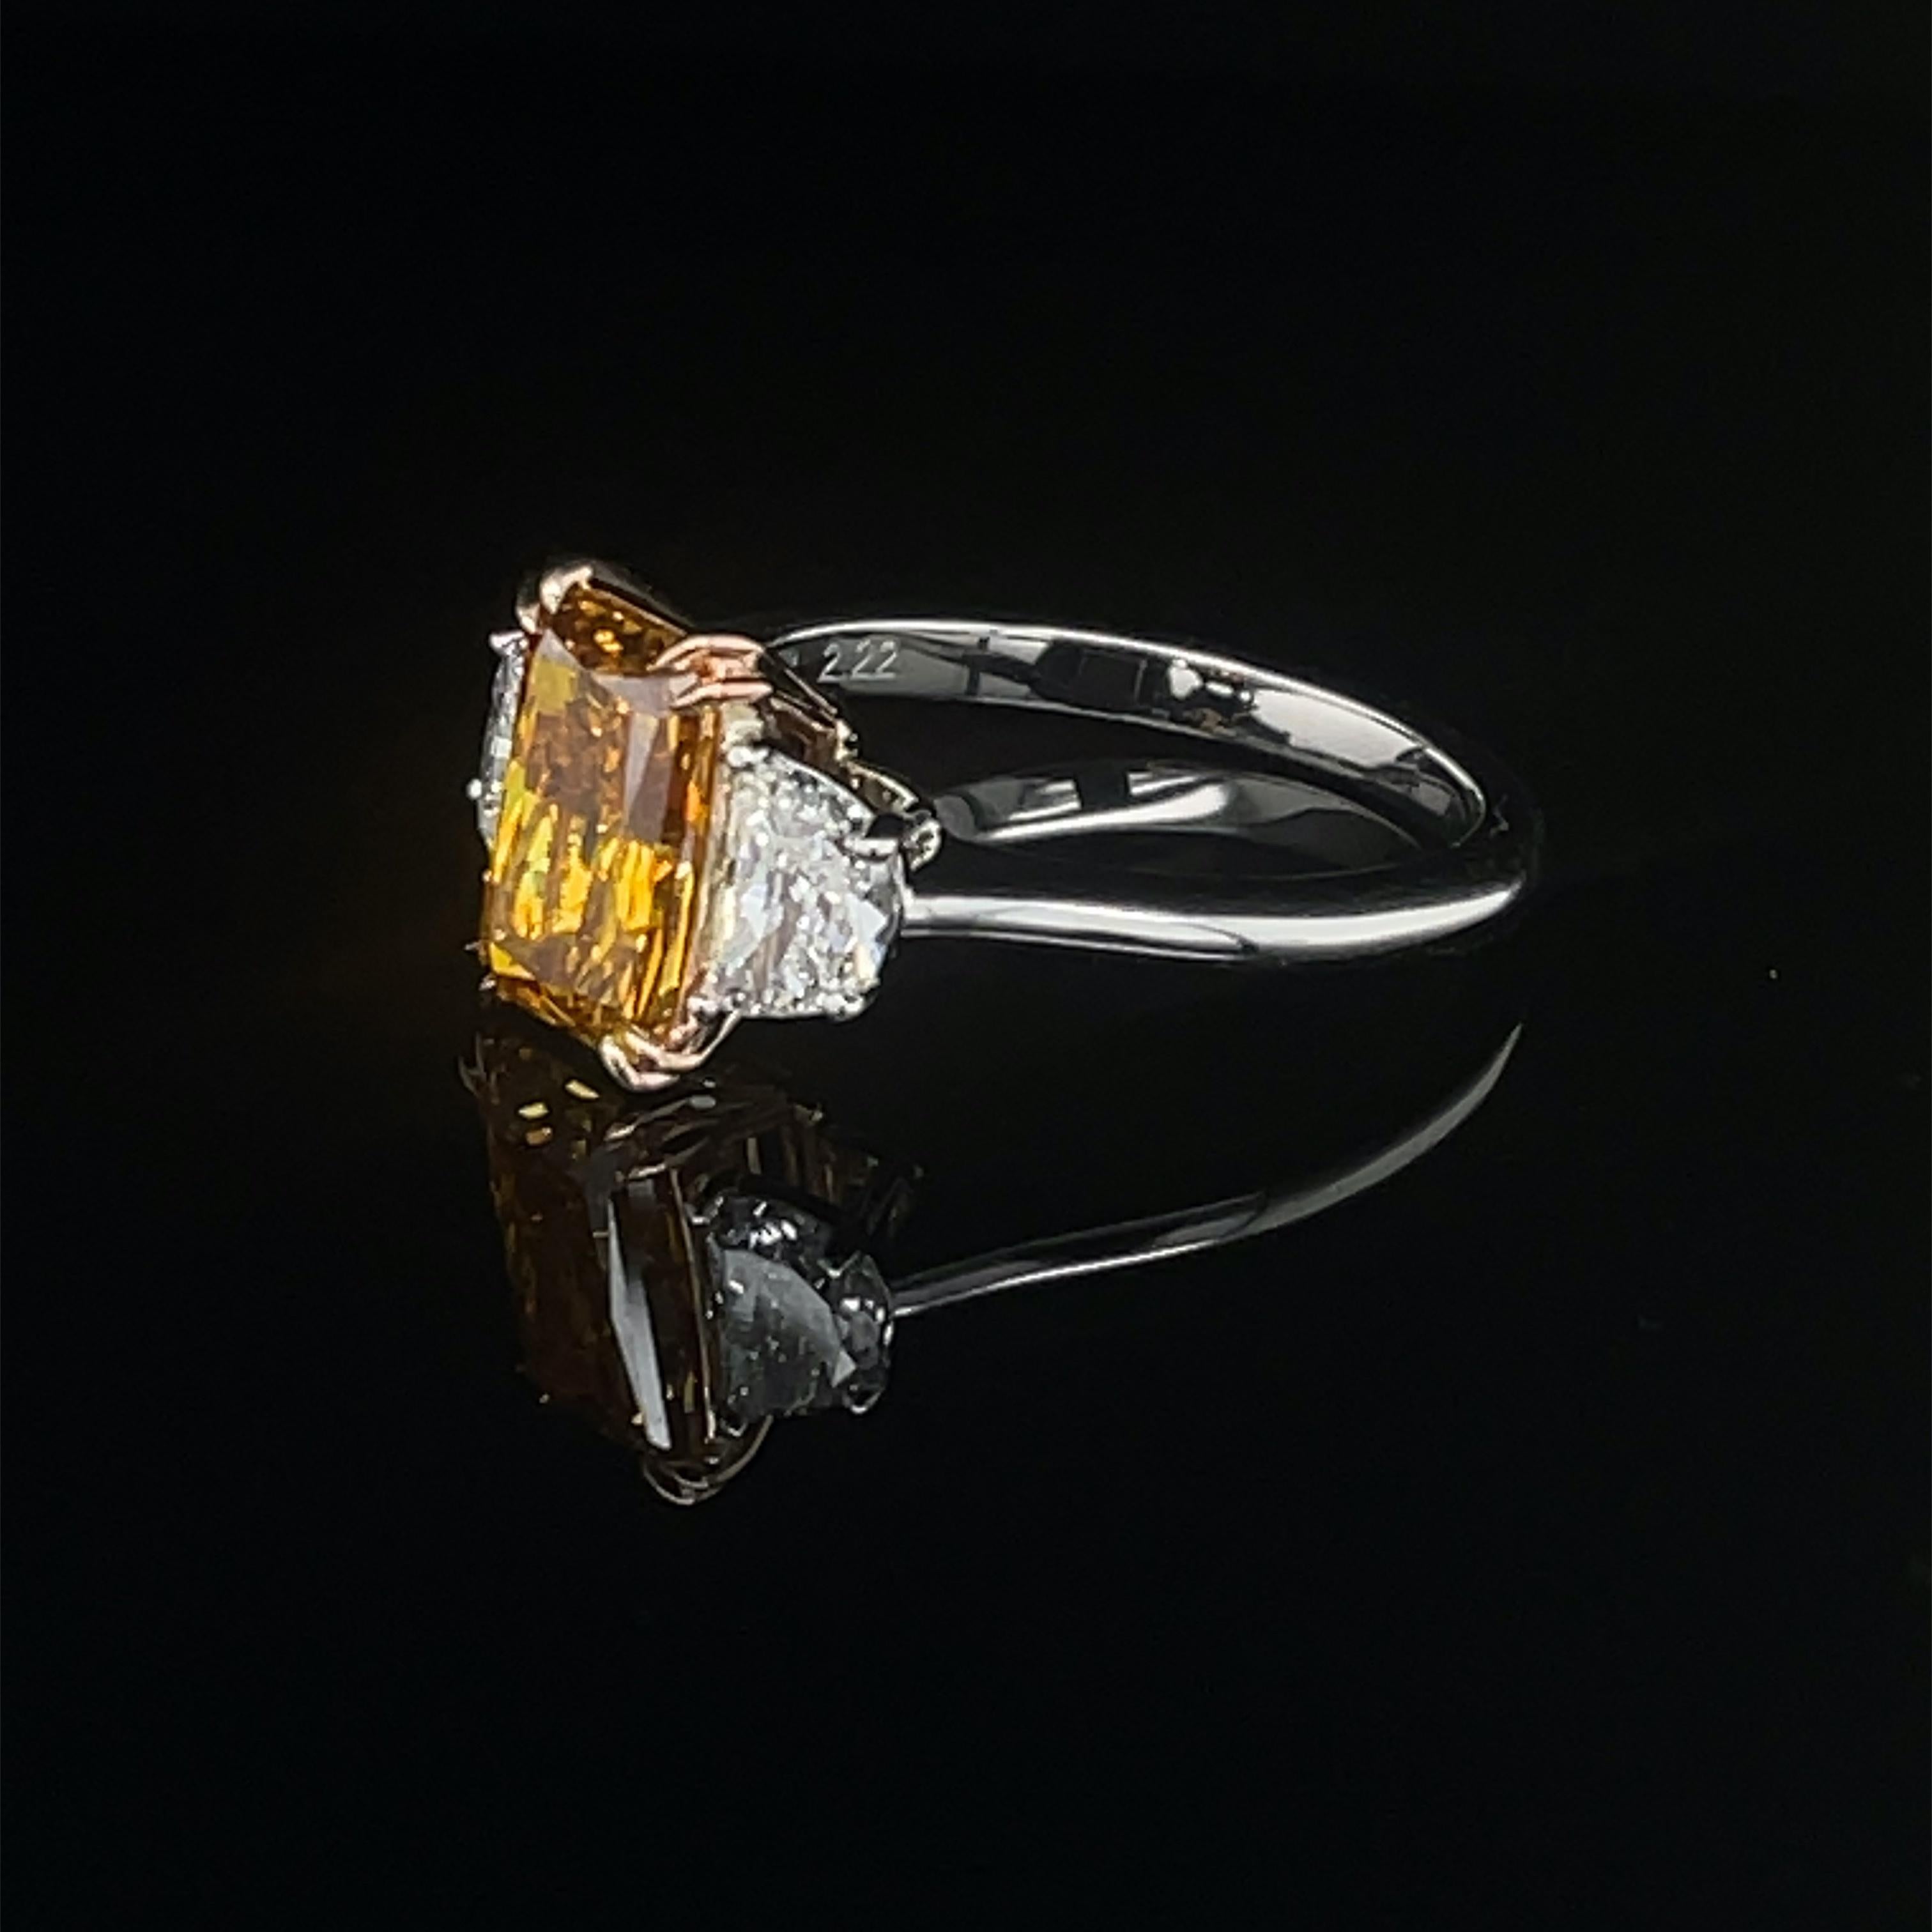 An exceptional and rare 2.22ct Fancy Deep Yellow Orange Radiant Diamond 
set in a platinum ring with 
2 Half Moon diamonds = 0.73cttw
GIA Certificate #5211956986
The color of this diamond is exceptional and rare and a diamond like this one enters